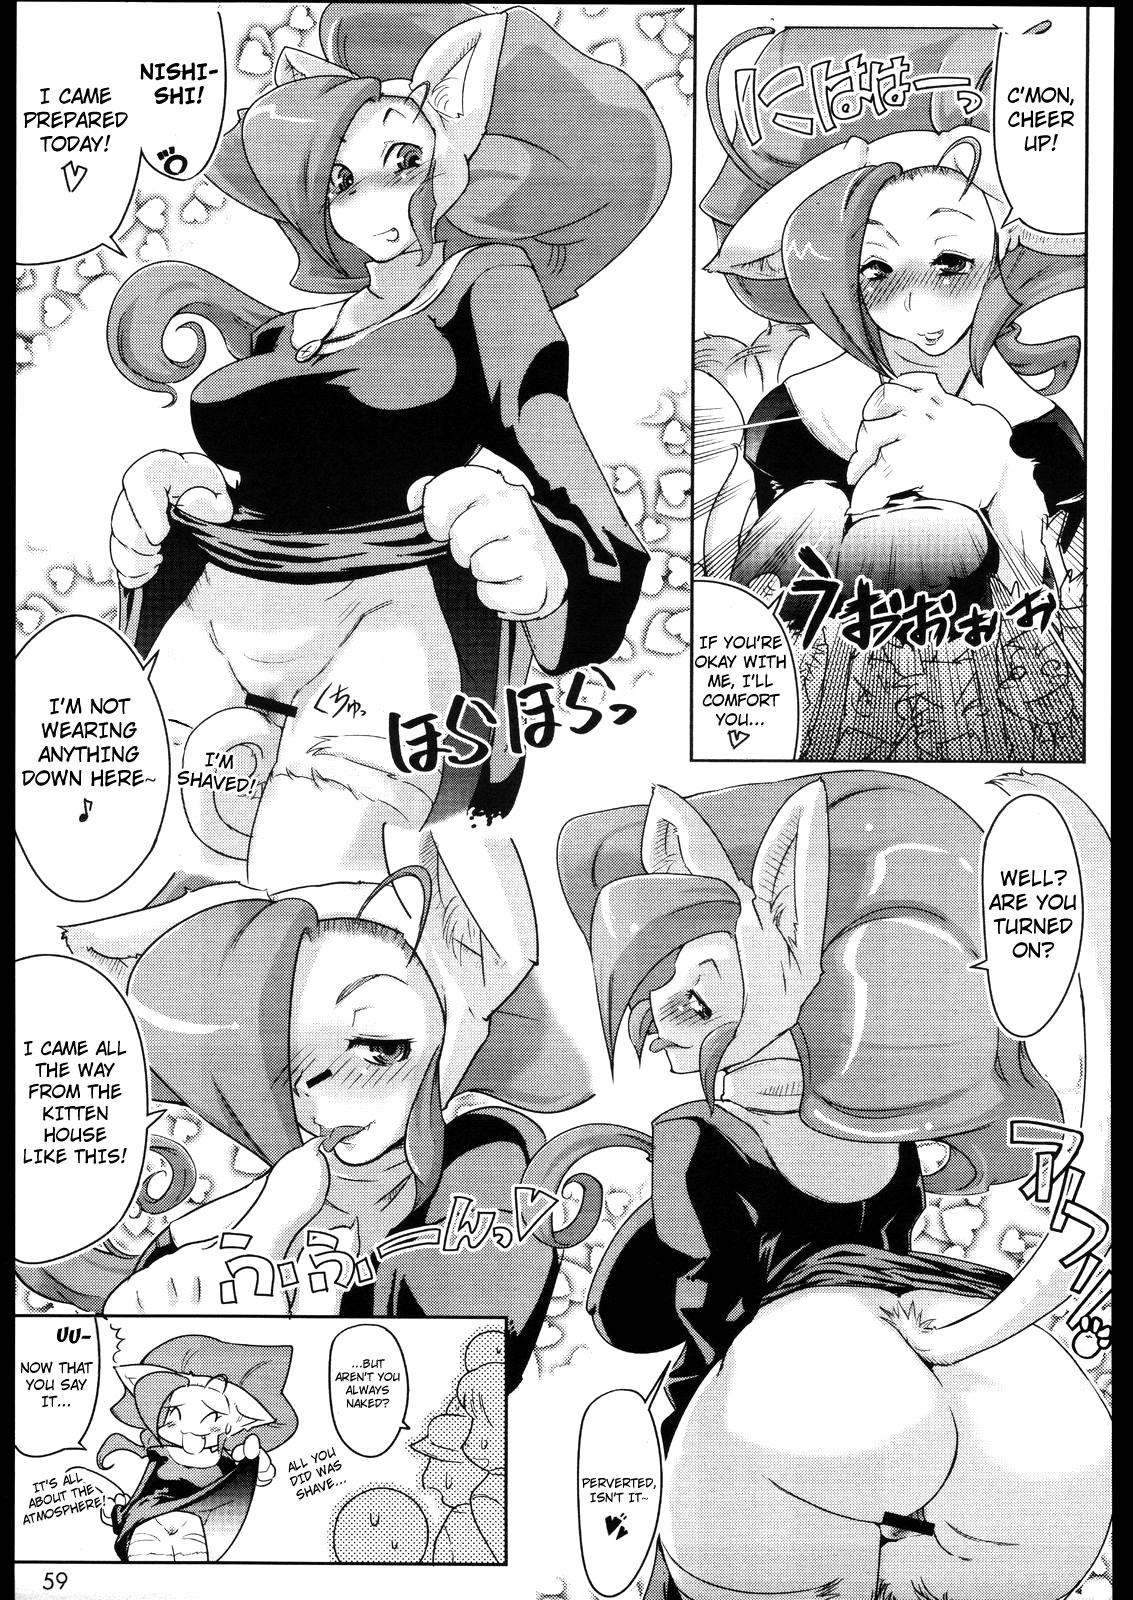 Cougars Always Cheerful! - Darkstalkers Fishnets - Page 5